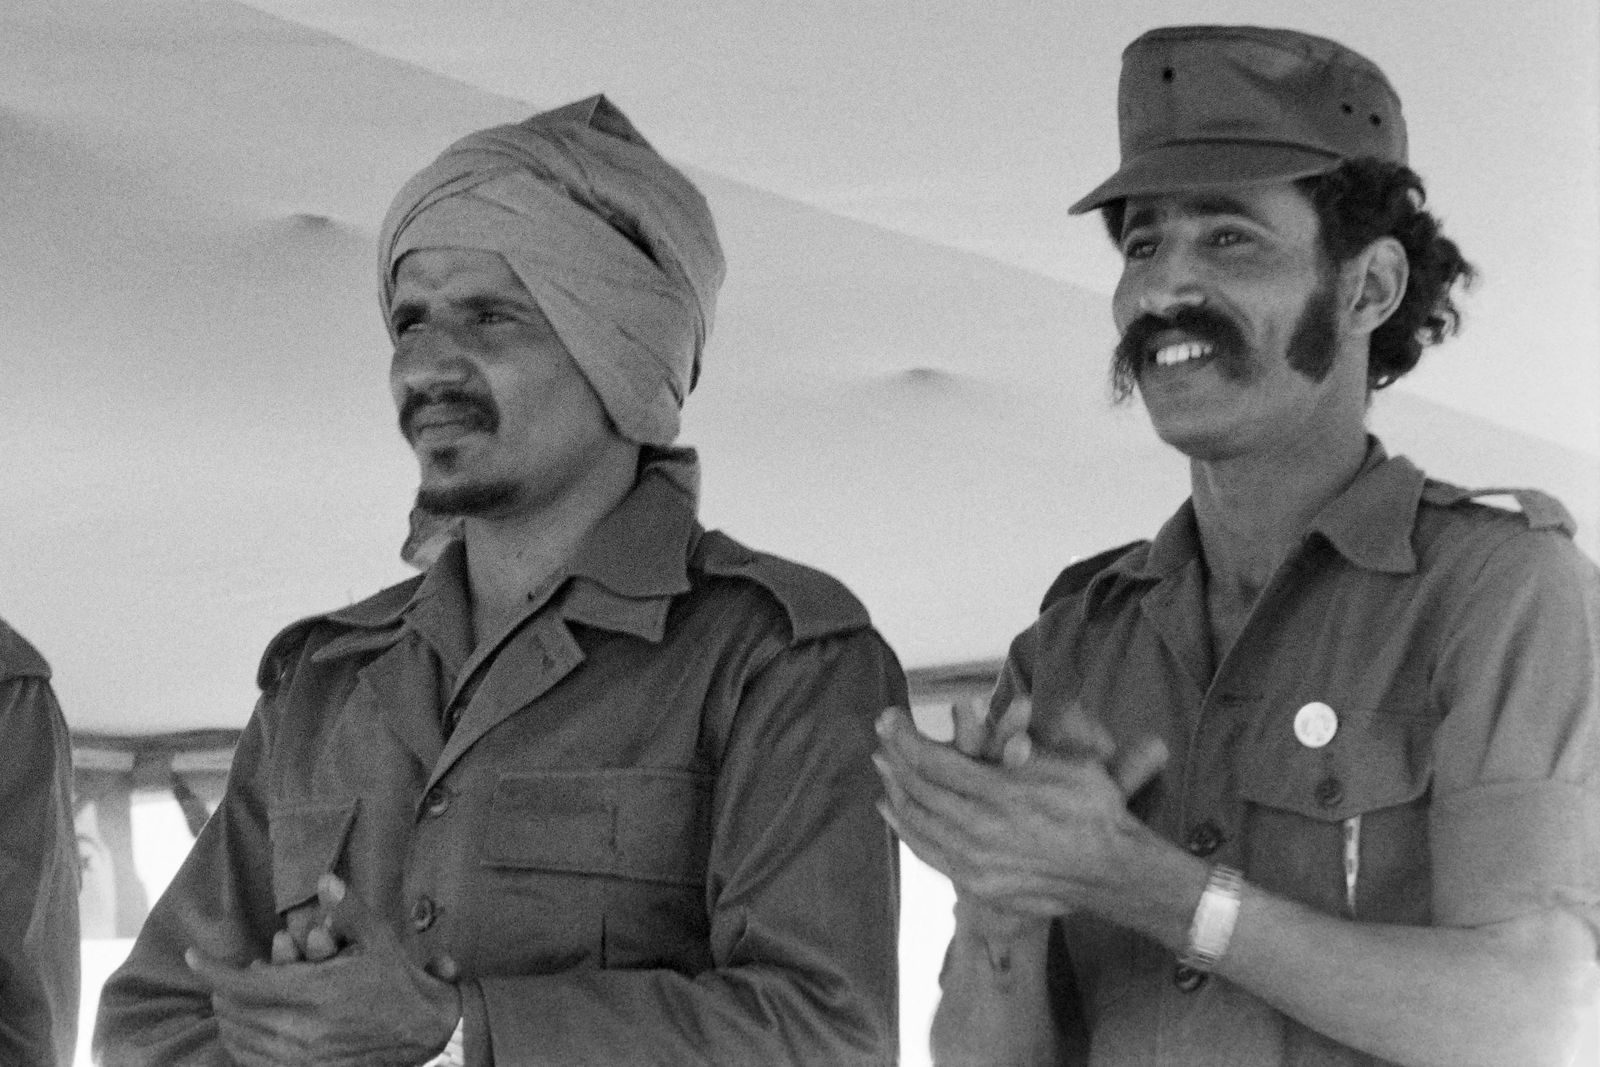 (FILES) In this file photo taken on February 28, 1978 then Defence minister Brahim Ghali (R) and Secretary General of the Polisario Front Mohamed Abdelaziz attend the 2nd anniversary of the proclamation of independence of the Sahrawi Arab Democratic Republic. - The leader of the Western Sahara independence movement, Brahim Ghali, at the heart of a diplomatic spat between Spain and Morocco will appear before a Madrid court on June 1, 2021 to answer allegations of torture. (Photo by Pierre TAILLEFER / AFP) - AFP